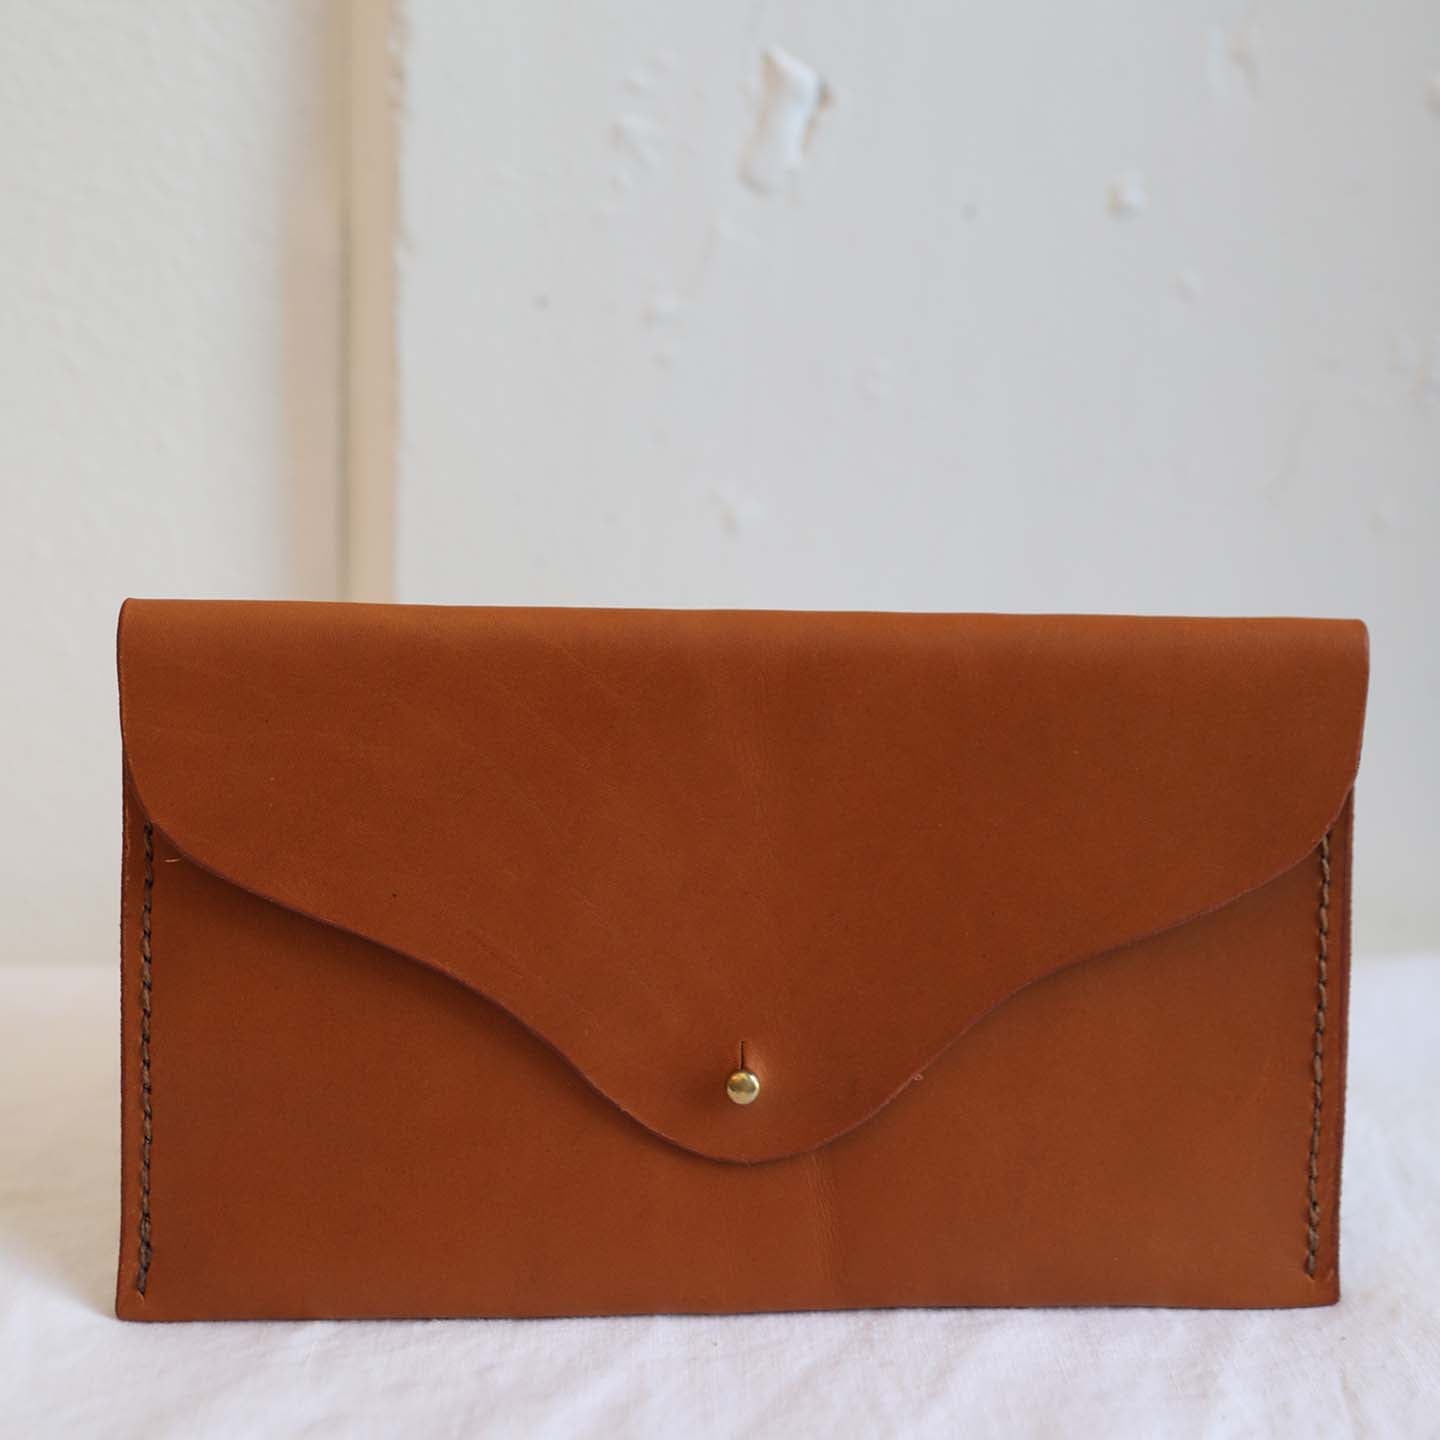 Ethically made caramel leather rectangle clutch with fold over flap and brass closure